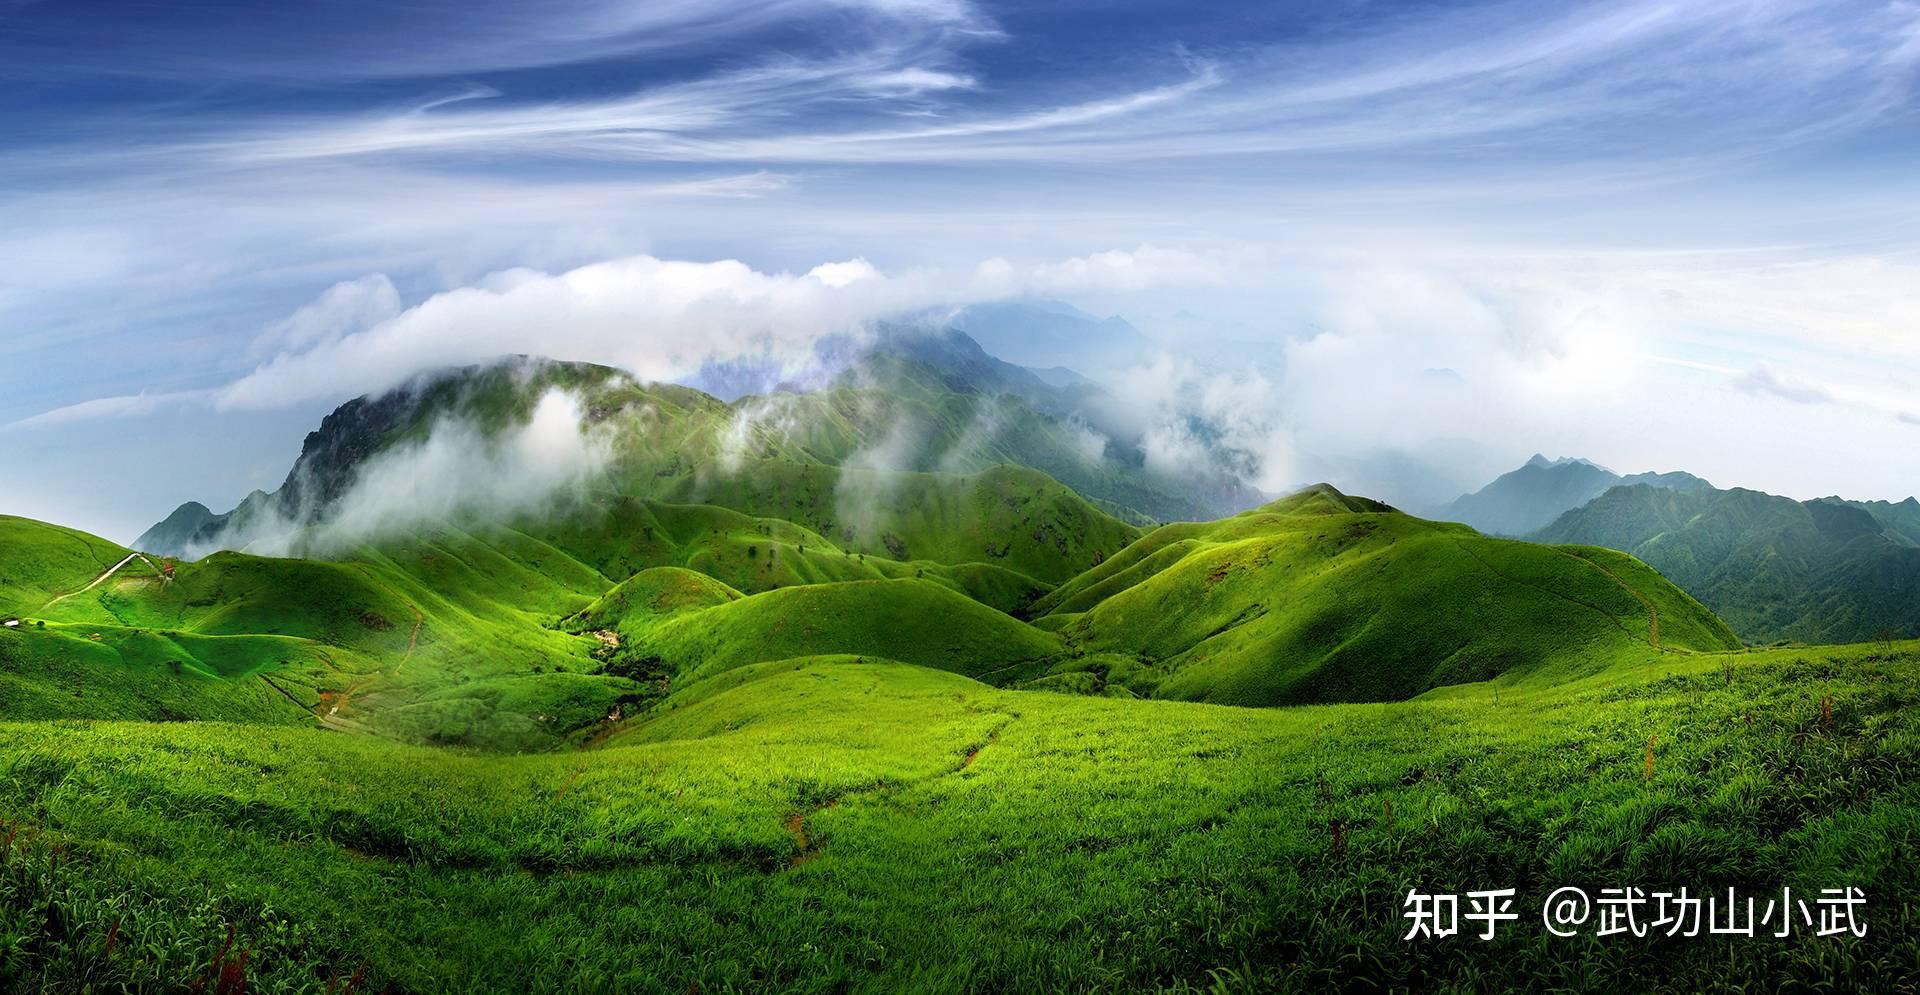 Huangshan Tour From Shanghai: All Inclusive 4-Day Huangshan Tour with Hongcun & Xidi Ancient Village